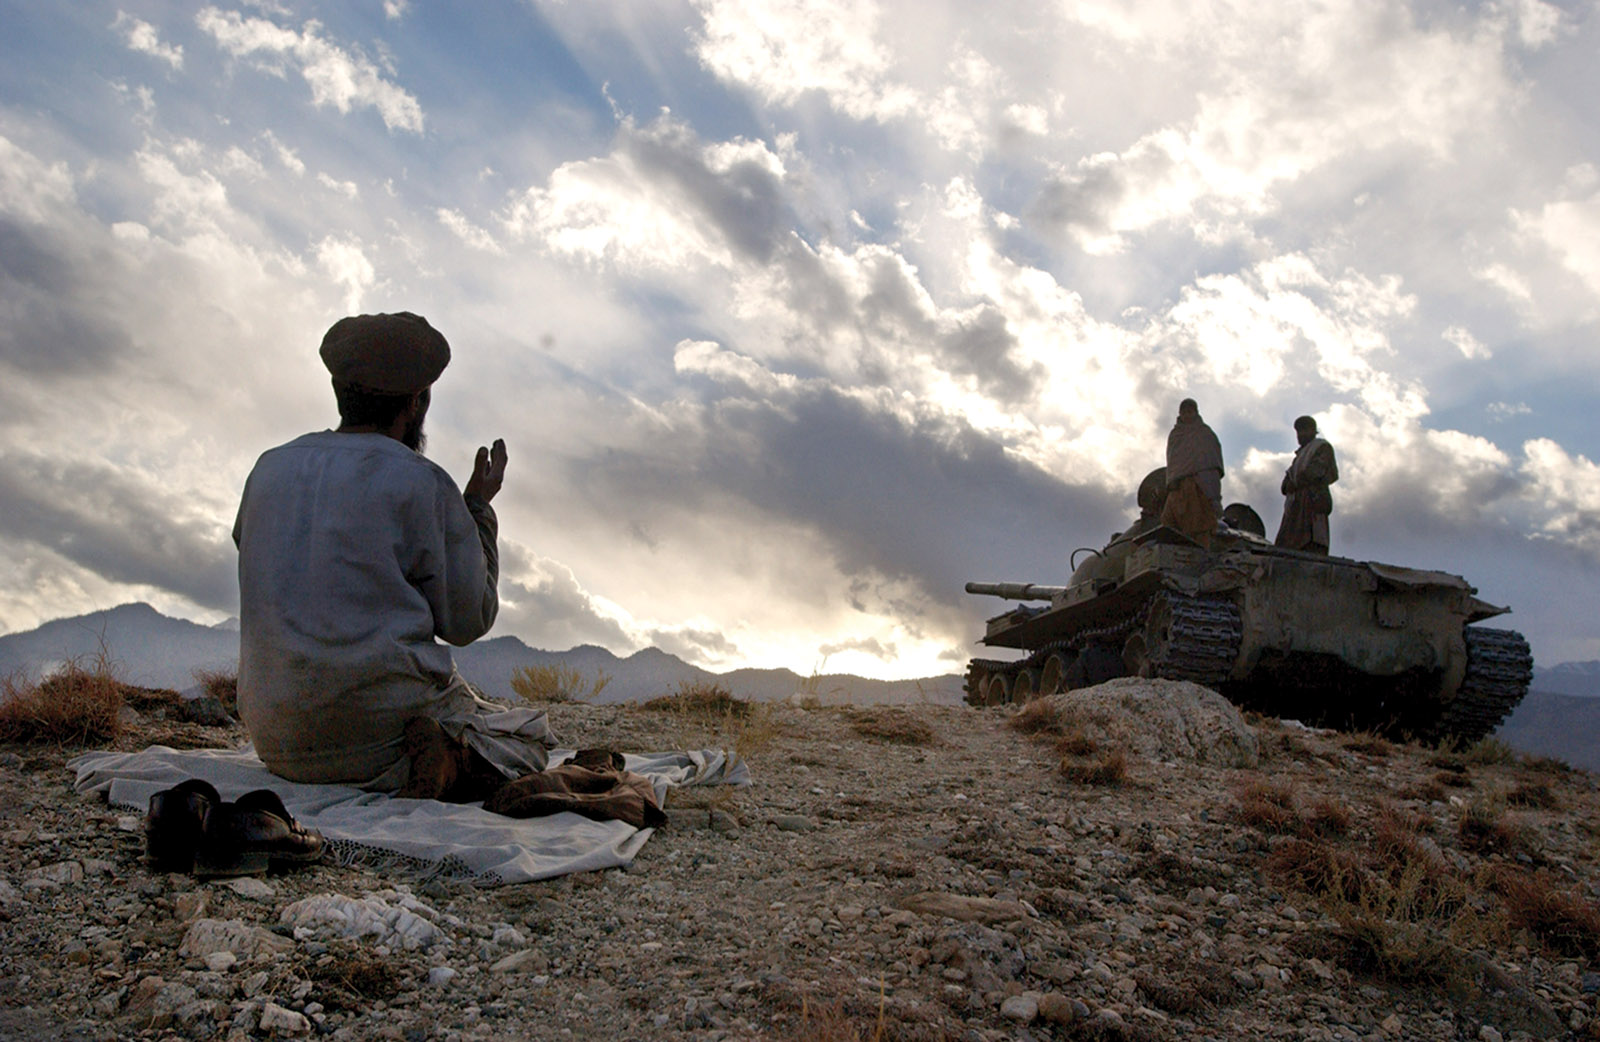 An Afghan soldier praying near Tora Bora during fighting against the Taliban, December 2001